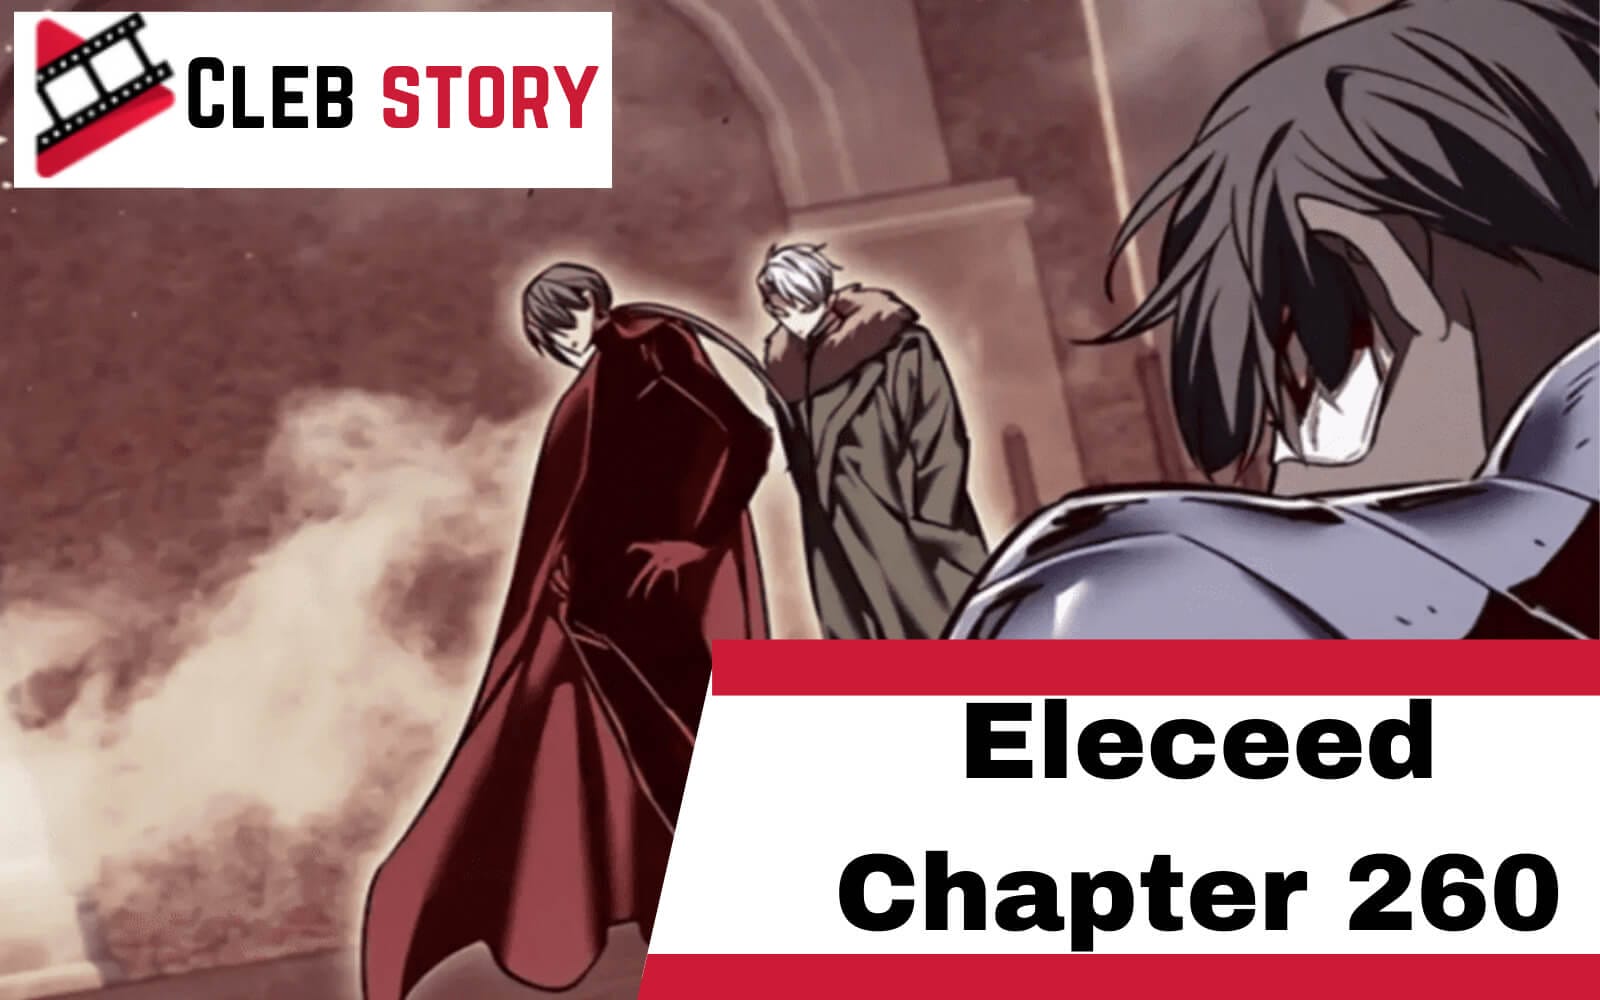 What will be going to happen in Eleceed Chapter 260